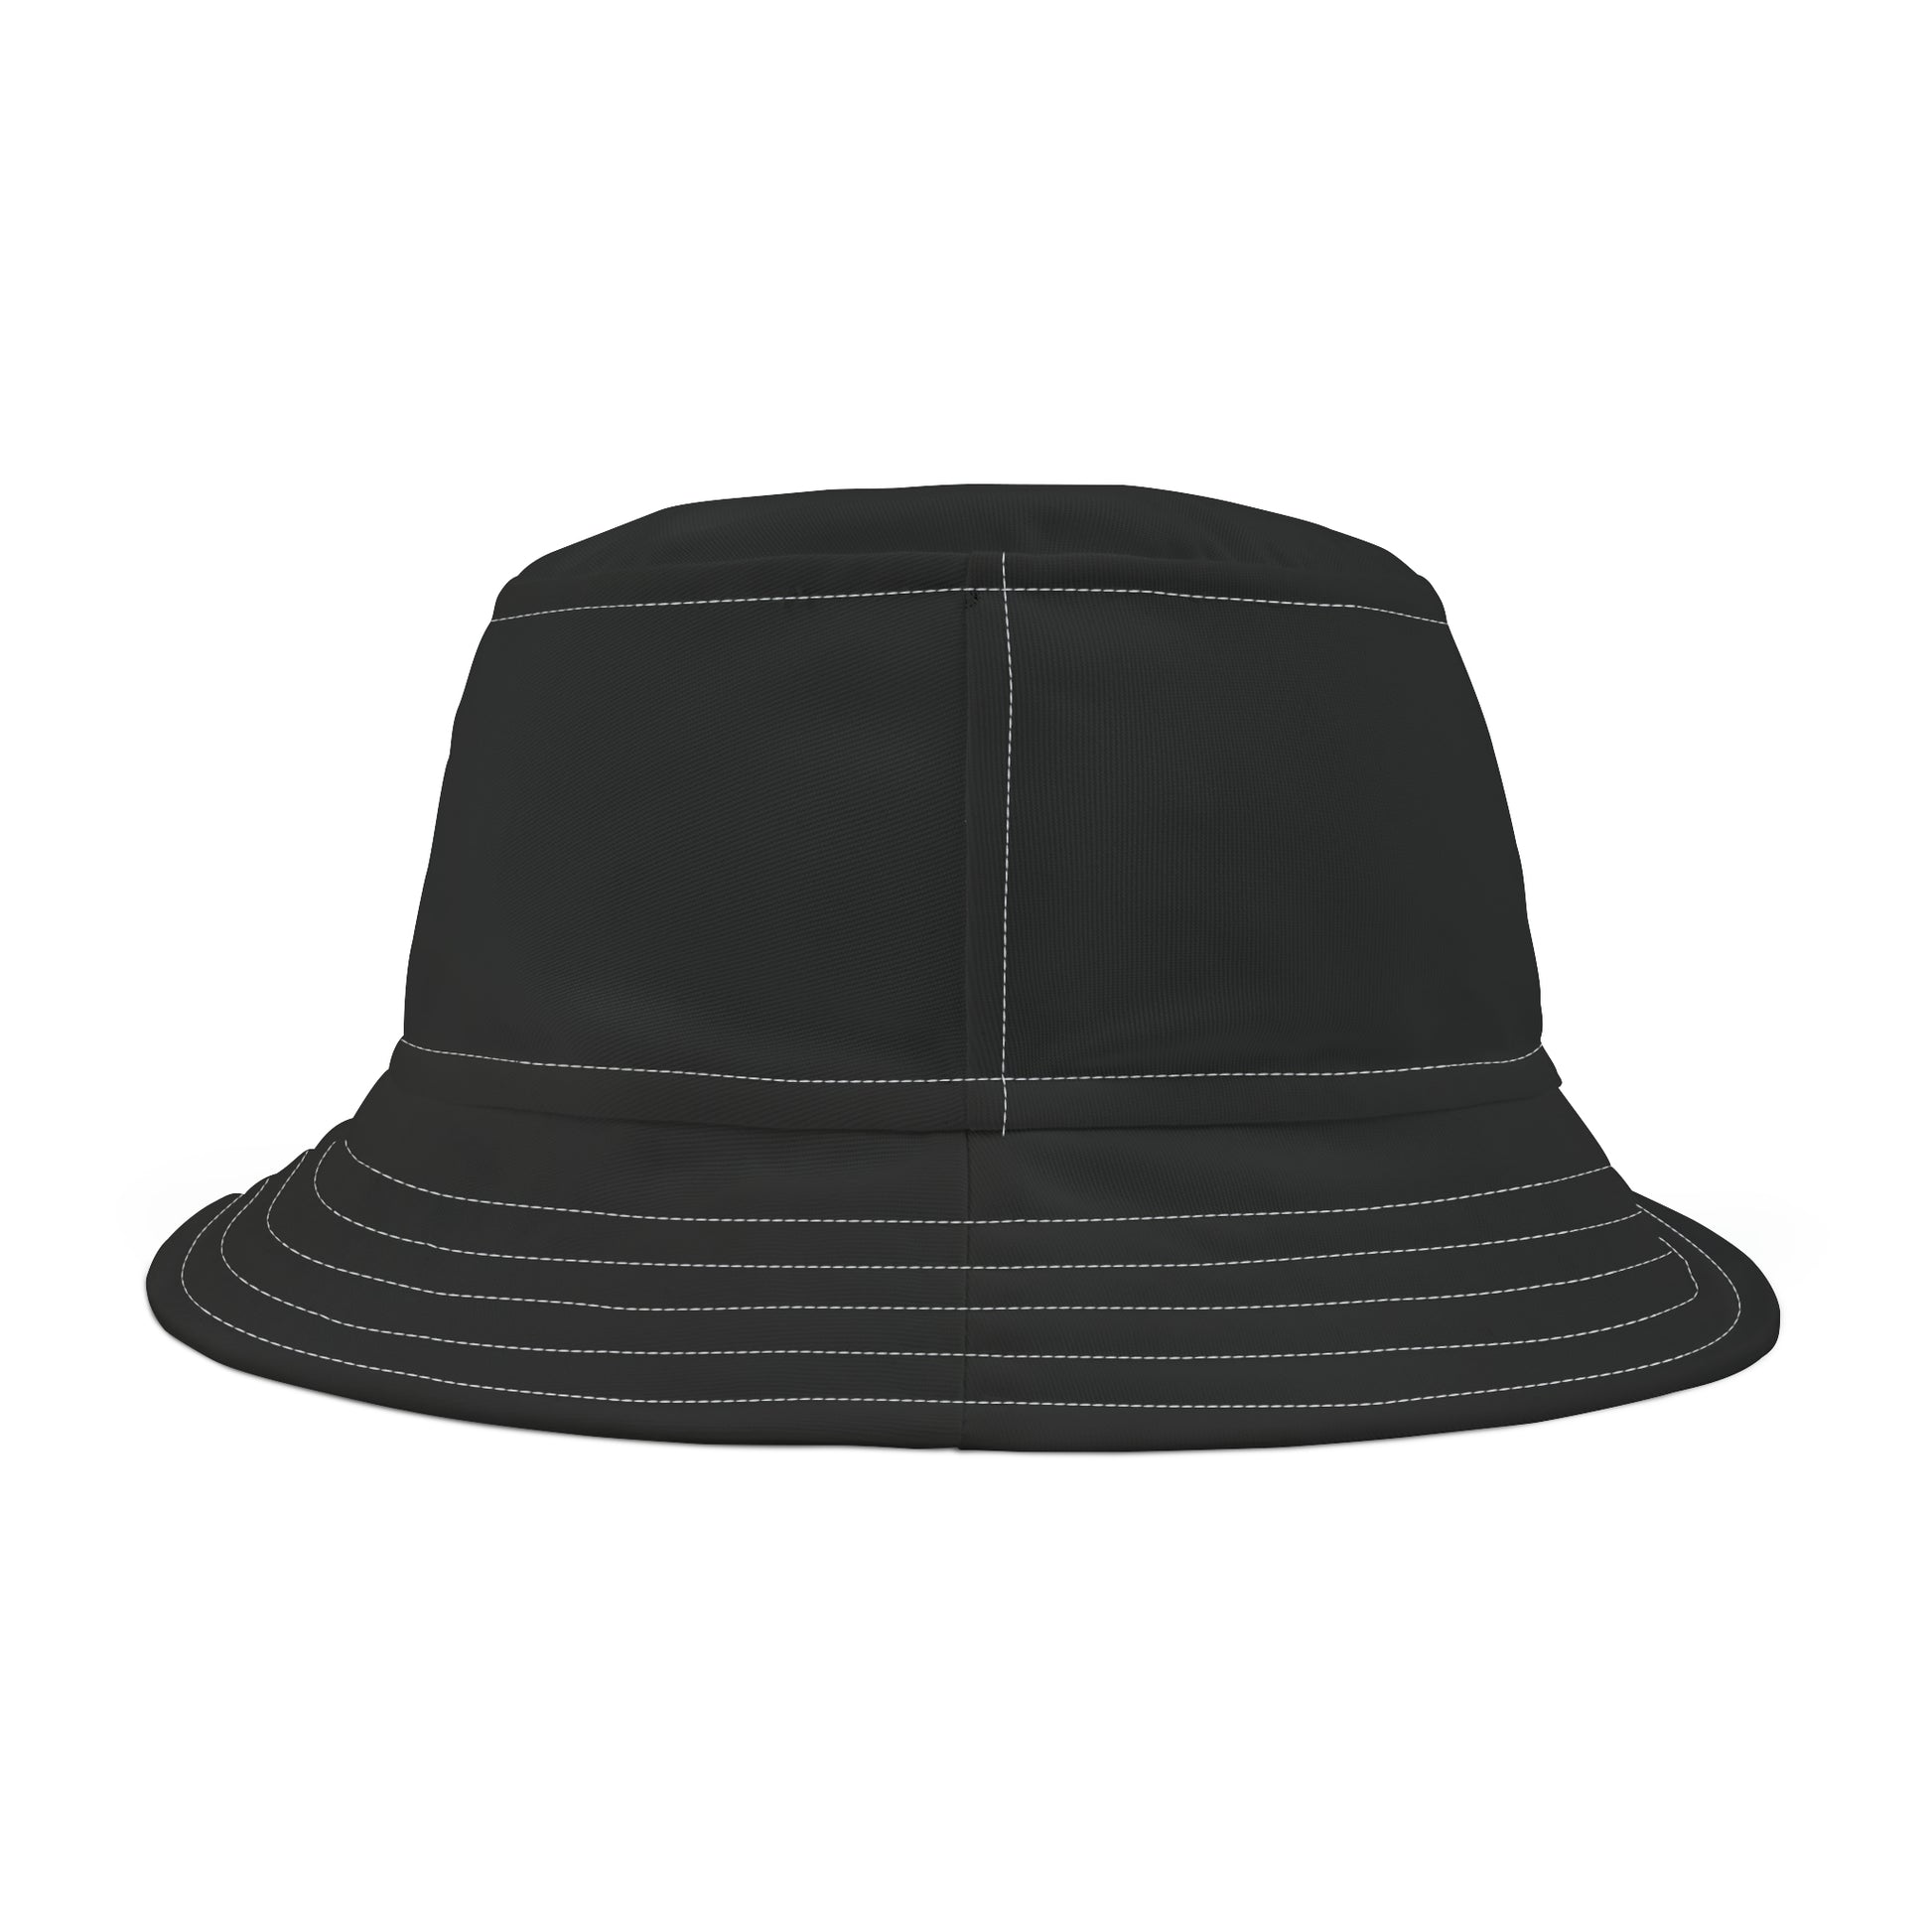 Child Of God Touch Not His Anointed Christian Bucket Hat (AOP) Printify